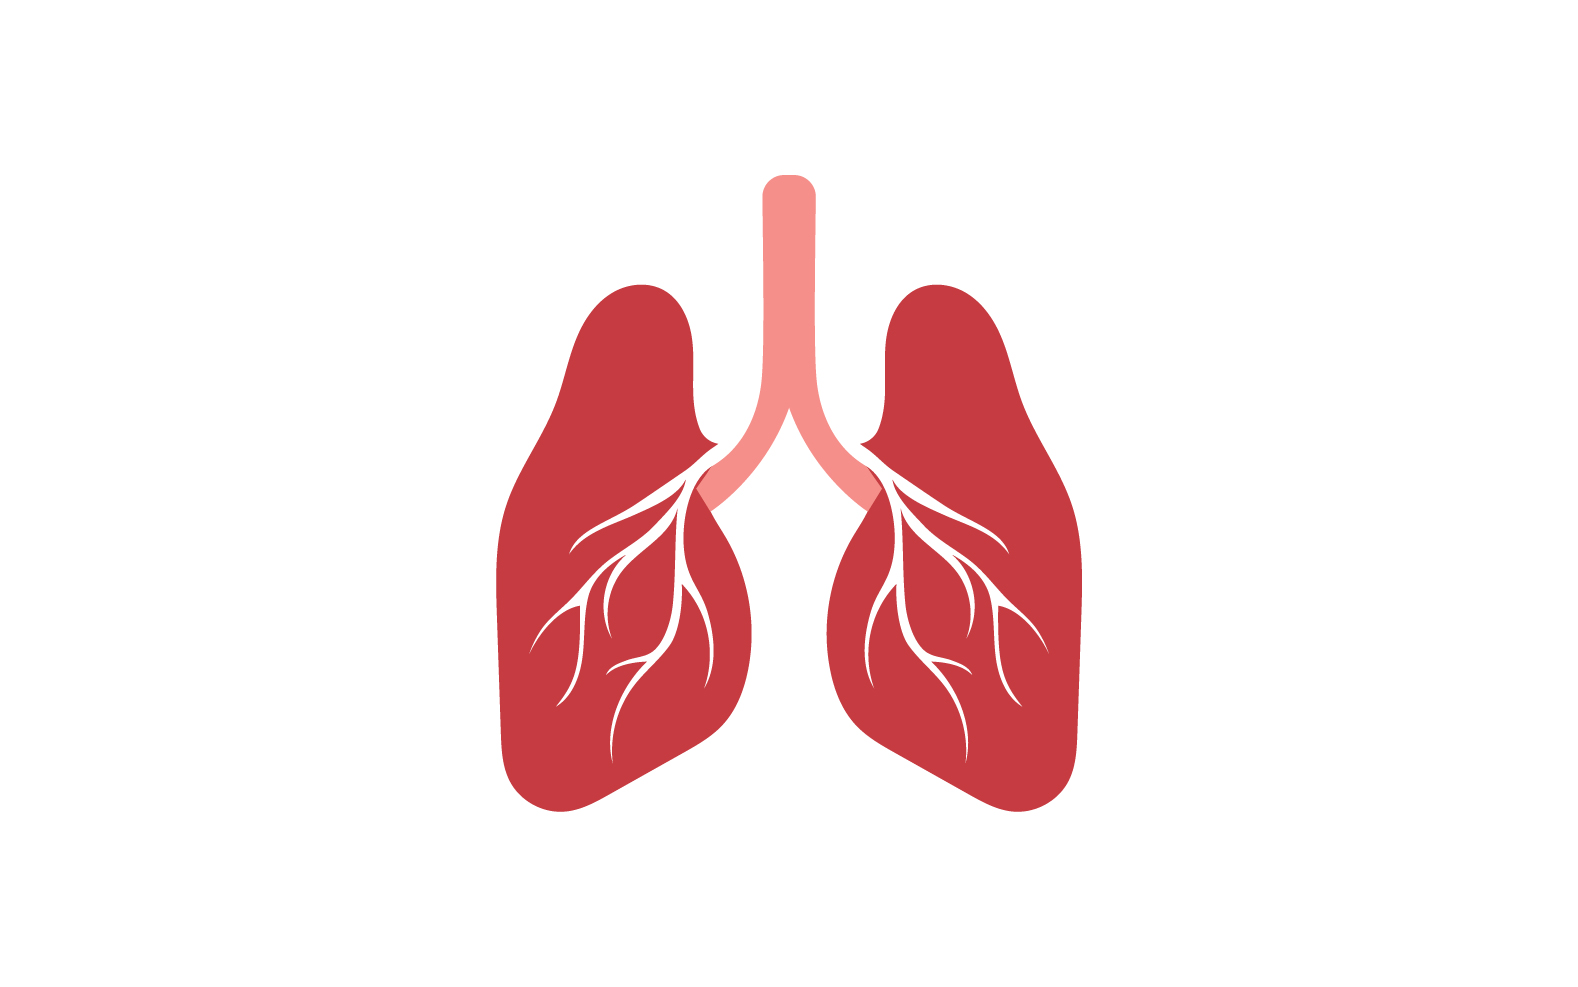 Health lungs logo and symbol vector v6